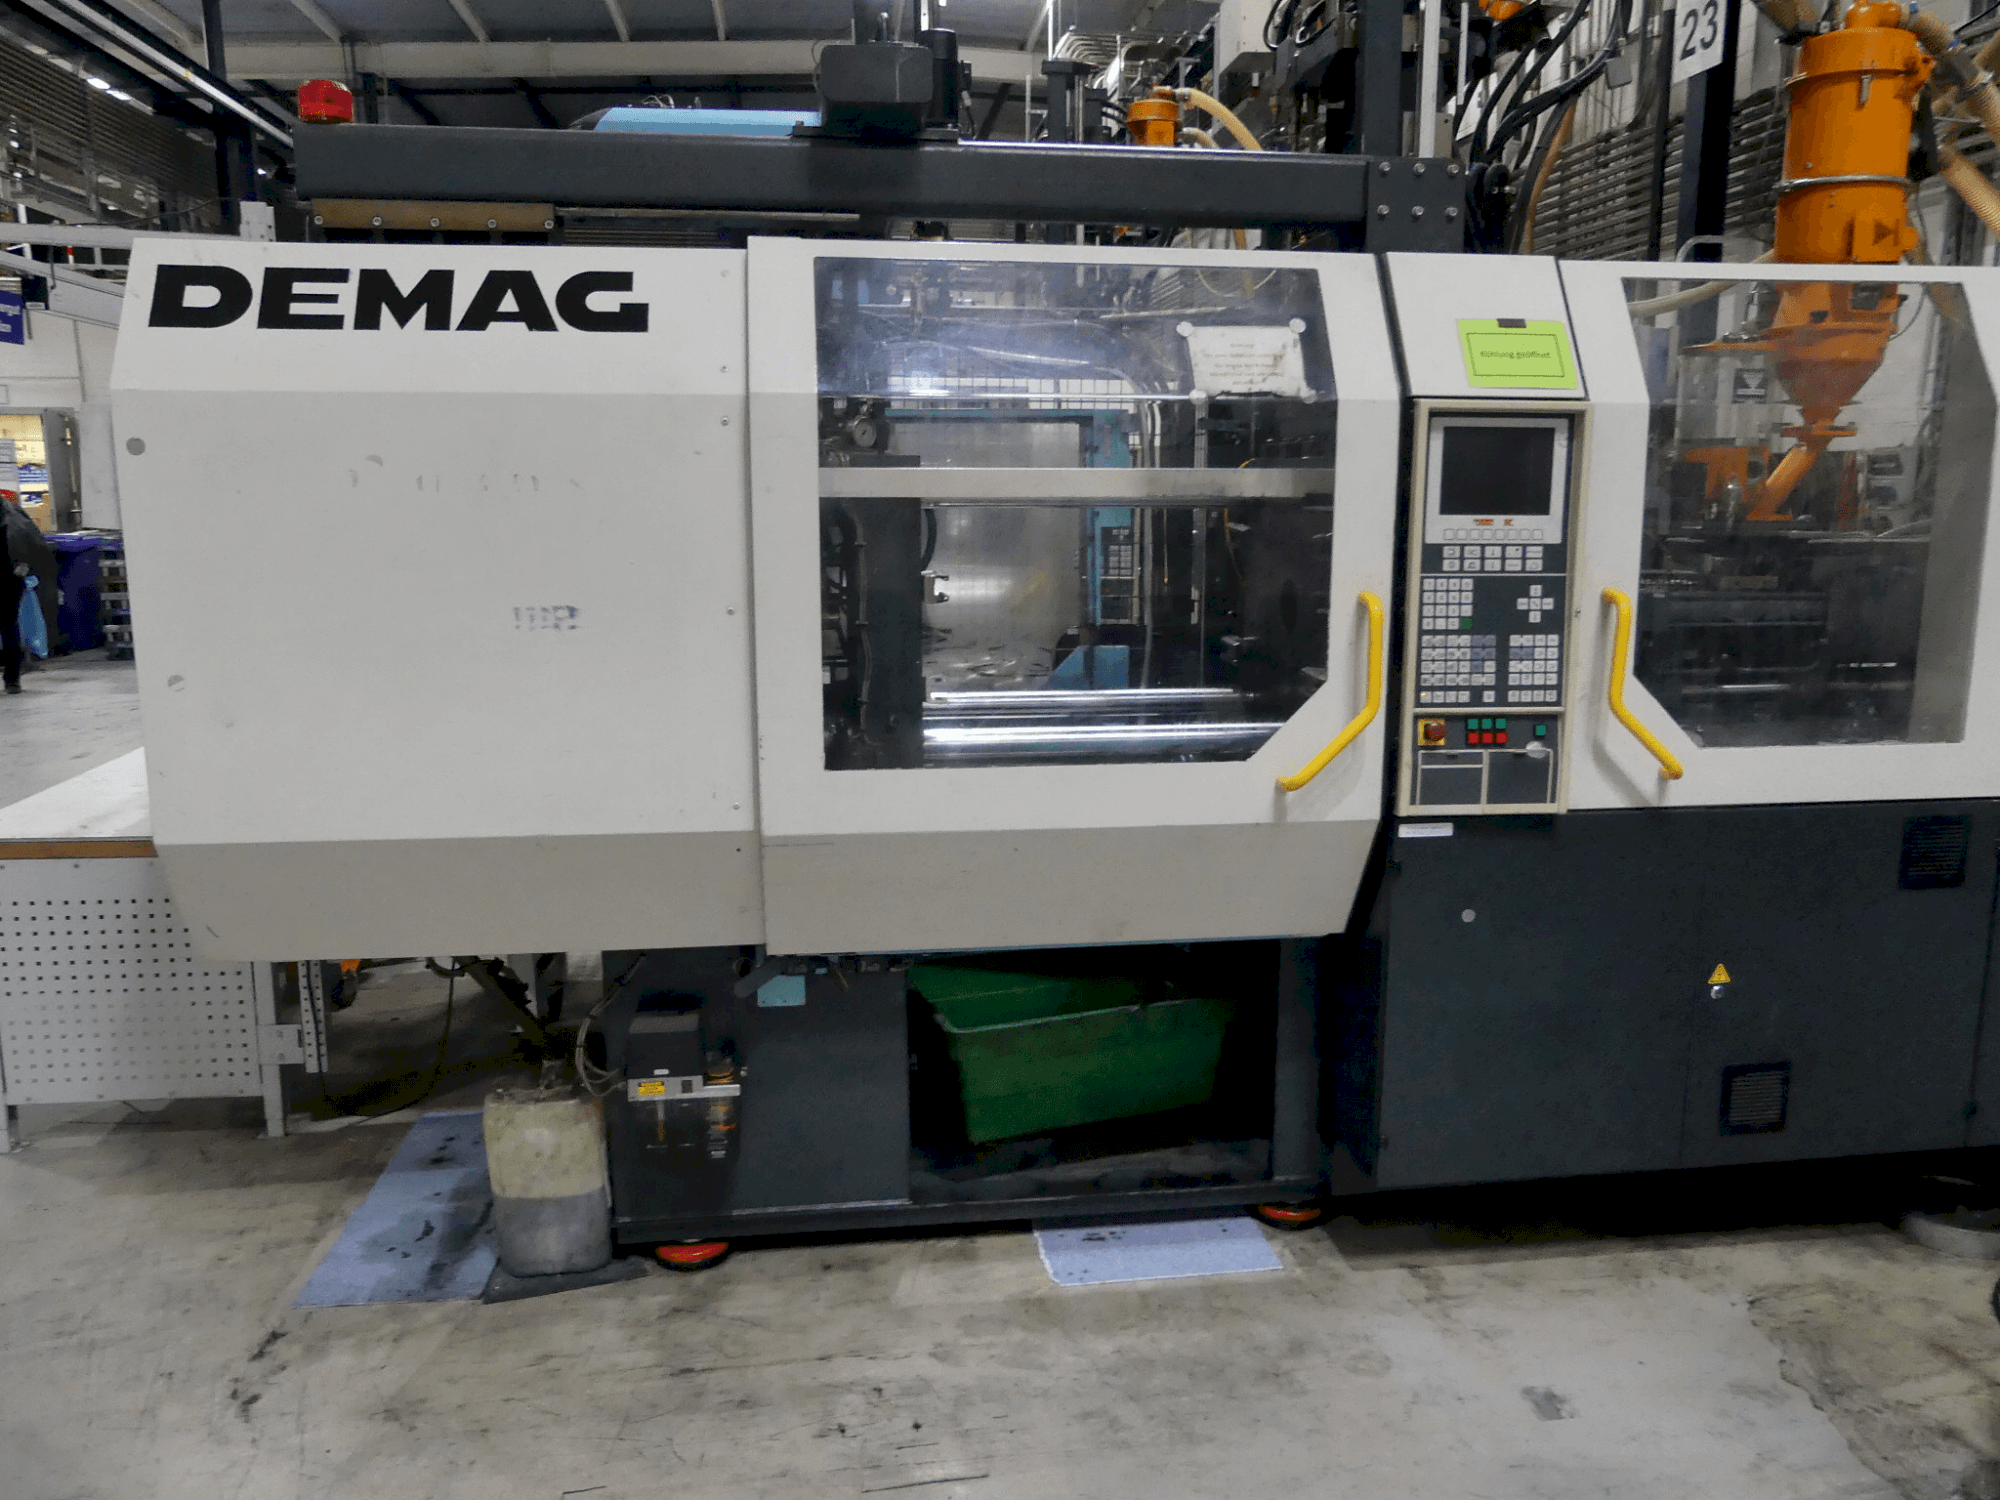 Front view of DEMAG D125-320h/120v  machine